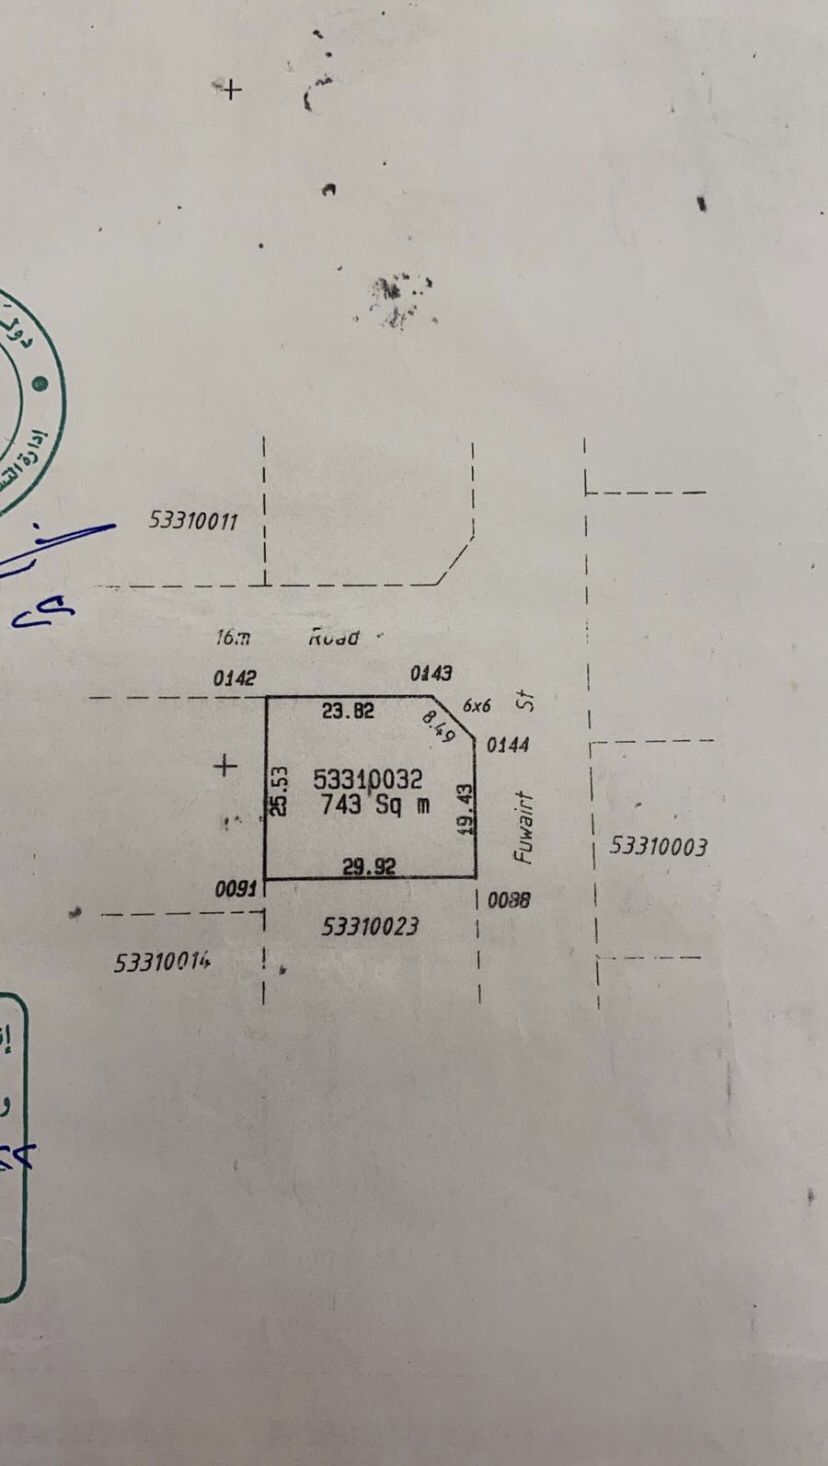 Residential Land Mixed Use Land  for sale in Doha-Qatar #19203 - 1  image 